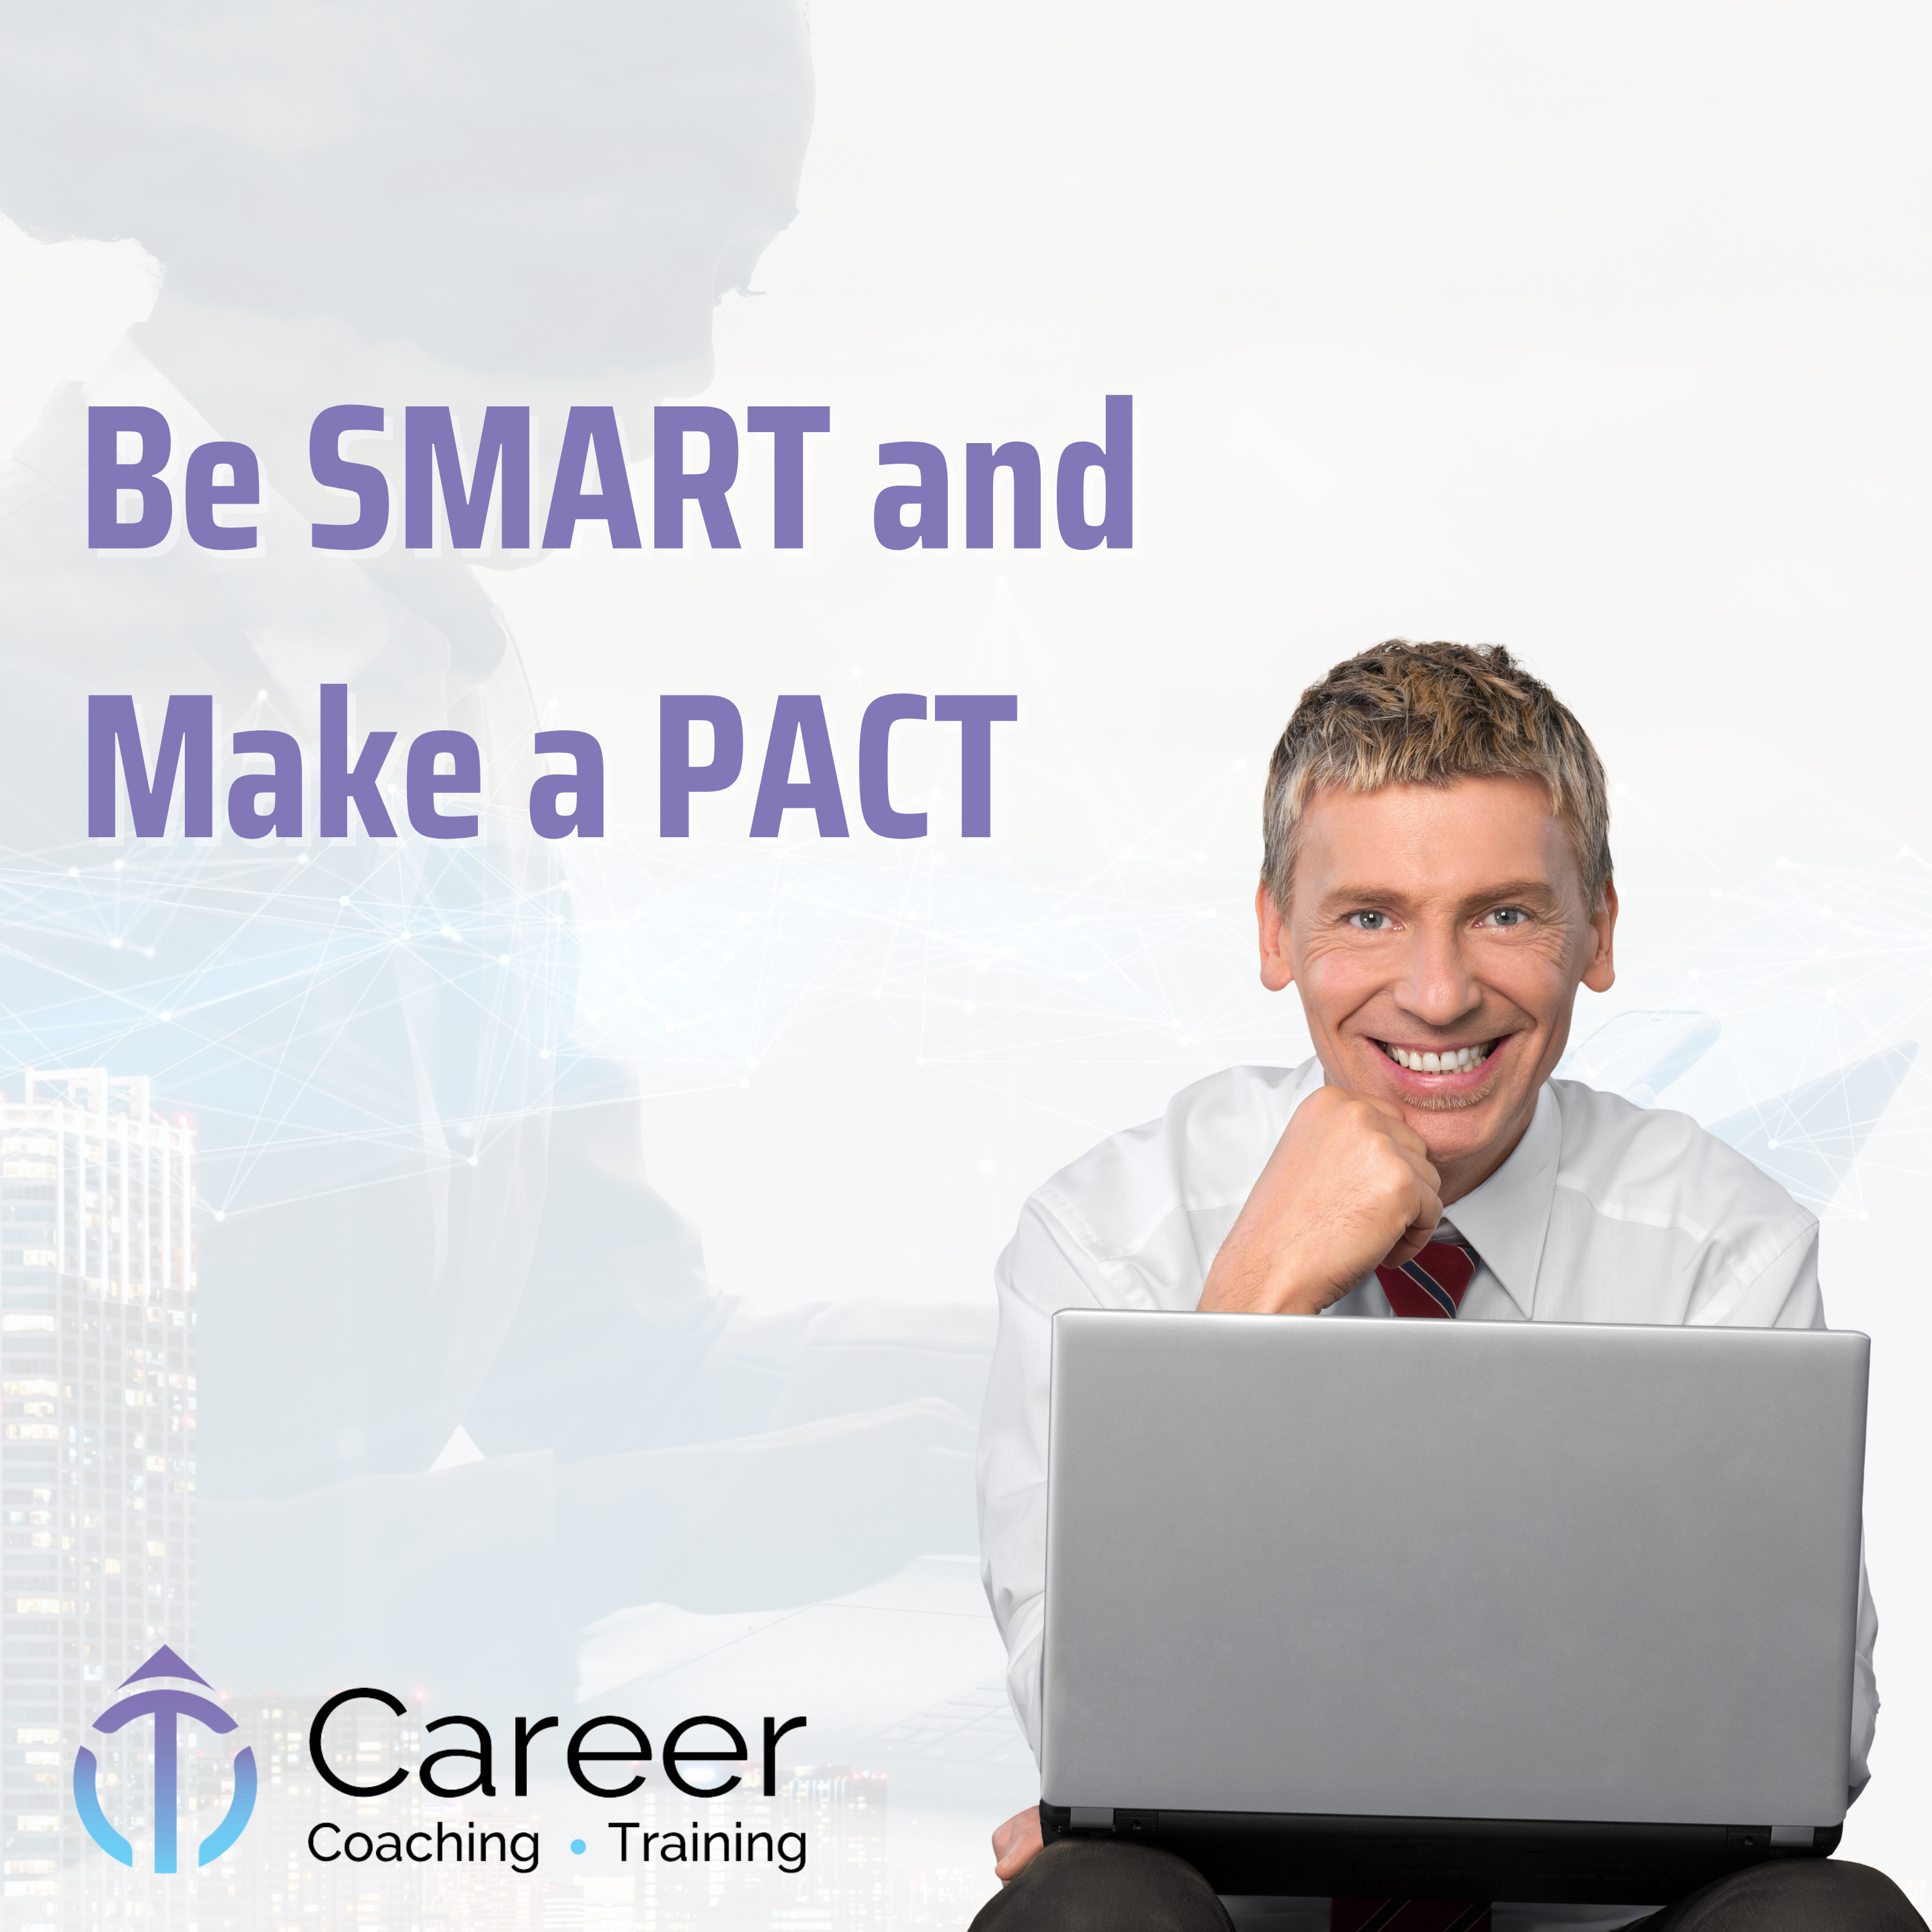 Goal Planning – Be SMART and Make a PACT